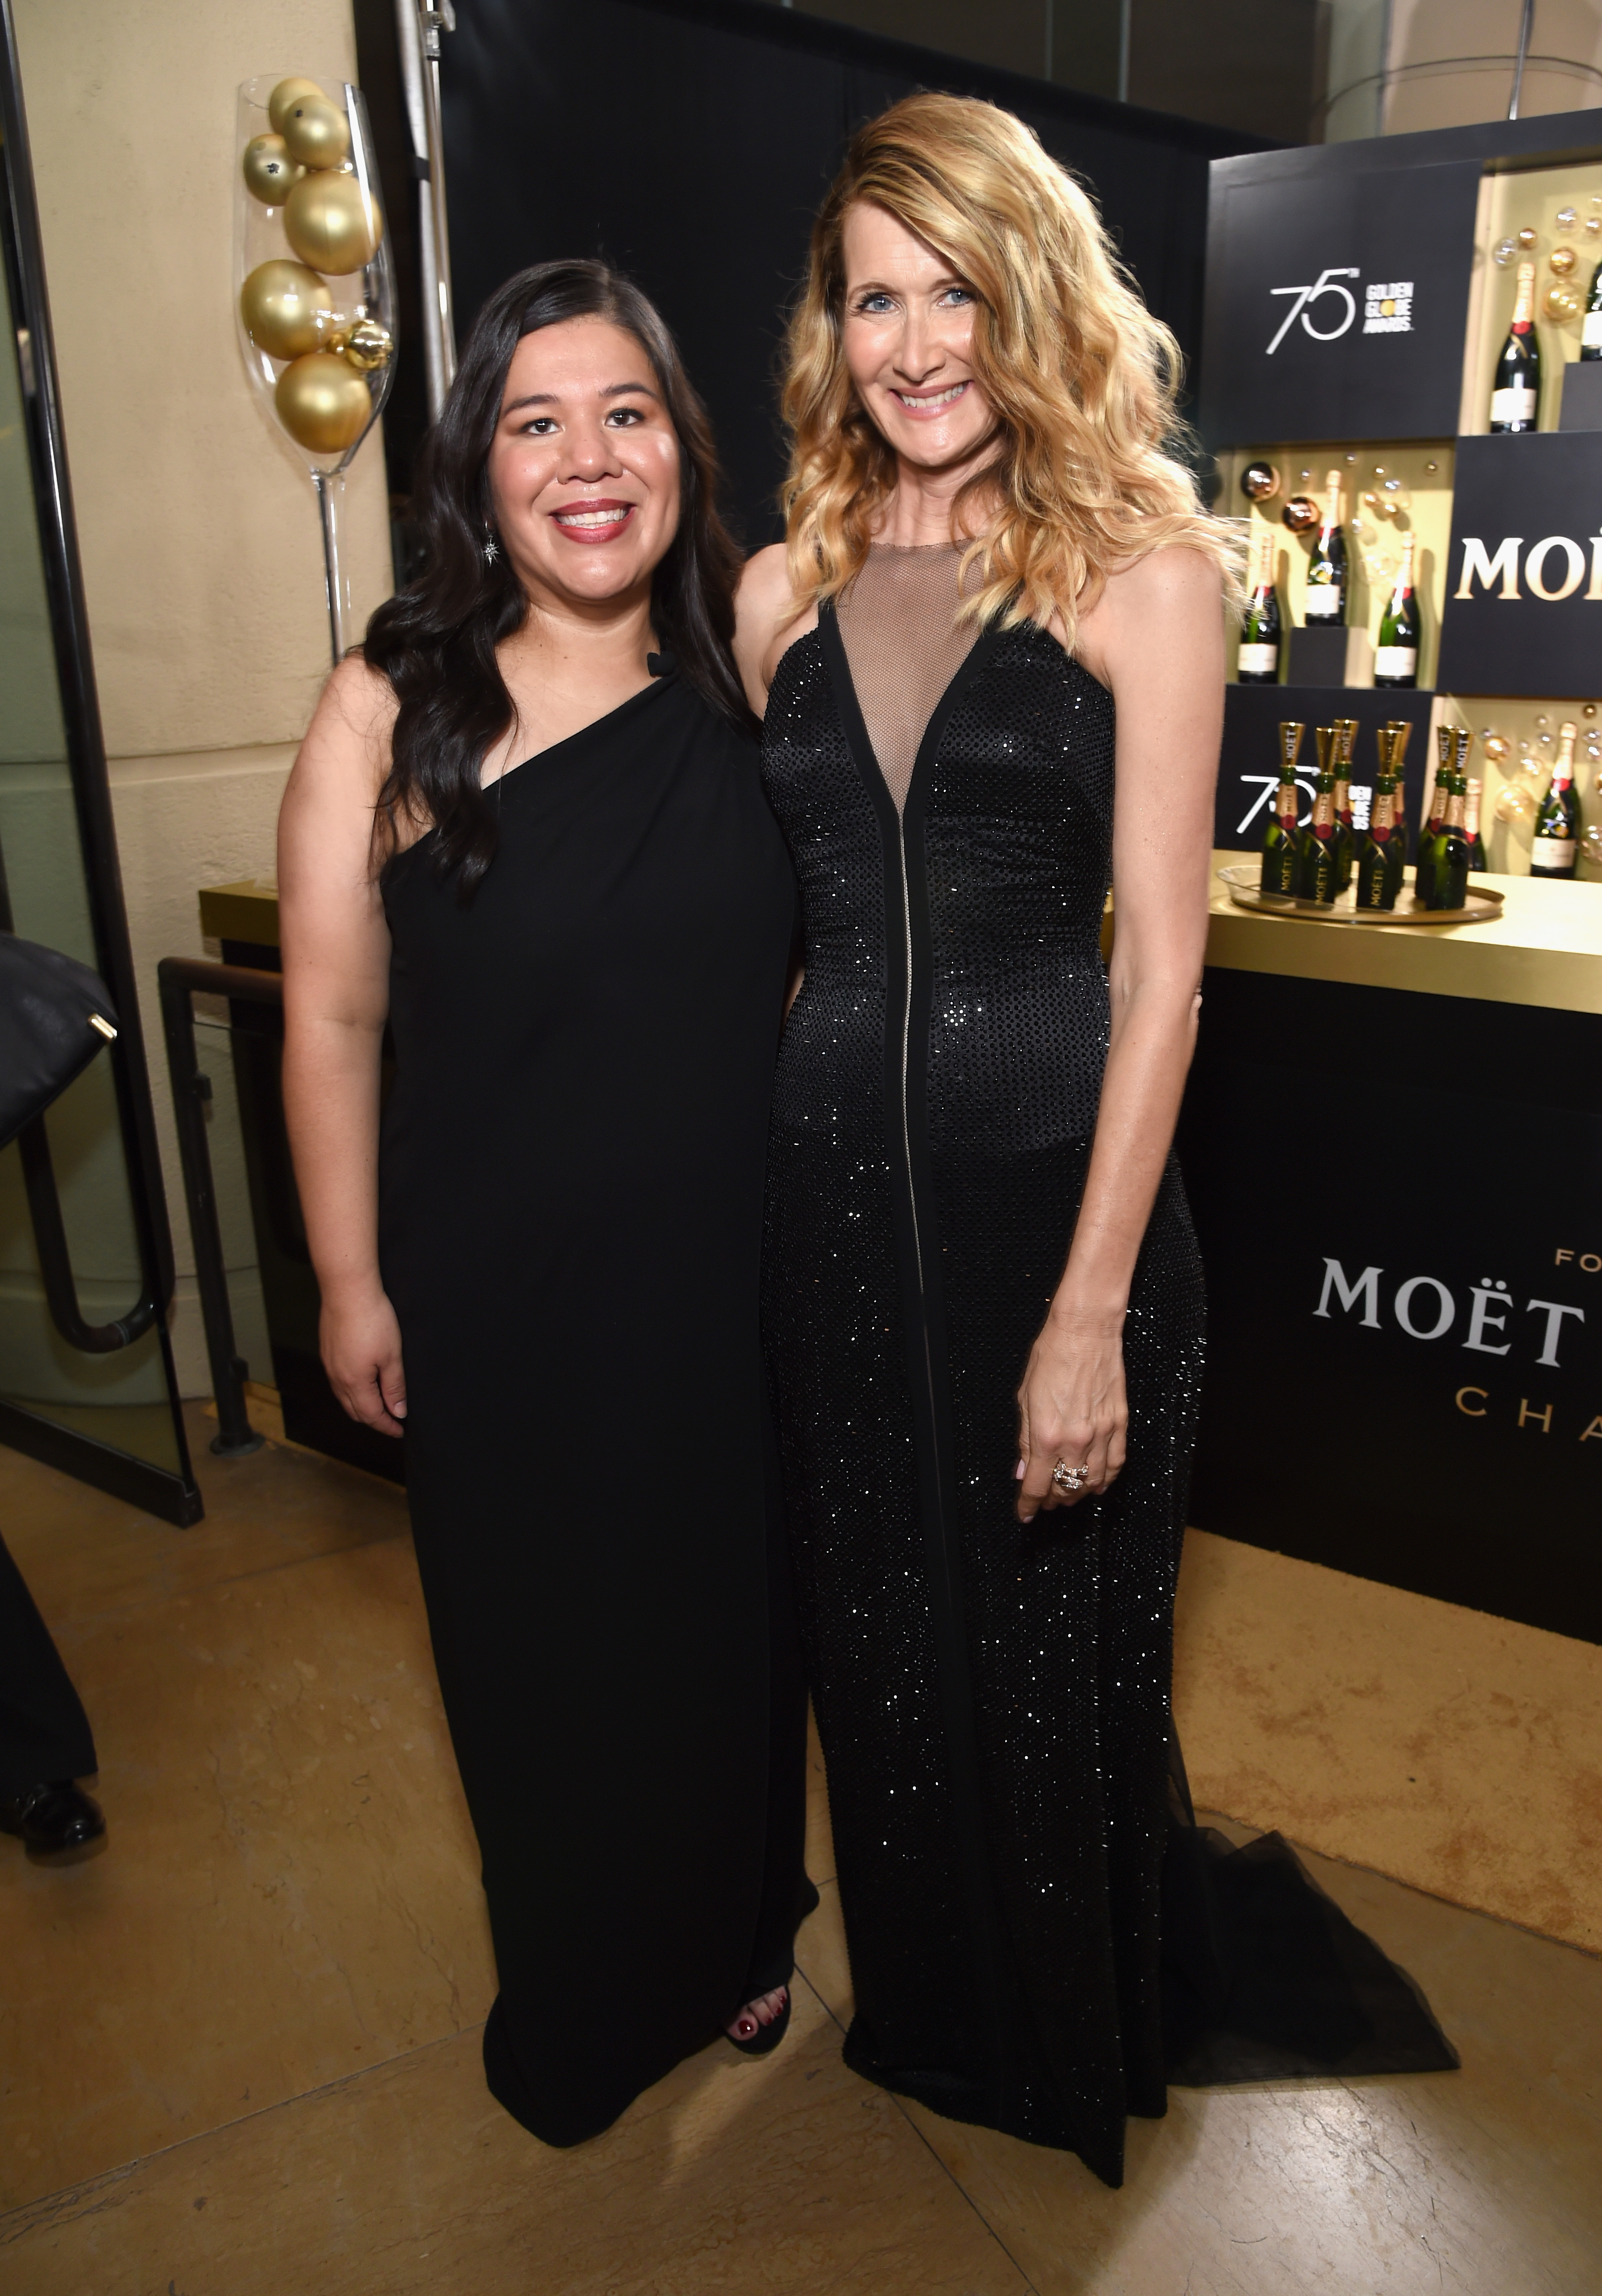 Activist Monica Ramirez and actor Laura Dern celebrate The 75th Annual Golden Globe Awards with Moet & Chandon at The Beverly Hilton Hotel on January 7, 2018 in Beverly Hills, California. (Michael Kovac—Getty Images)